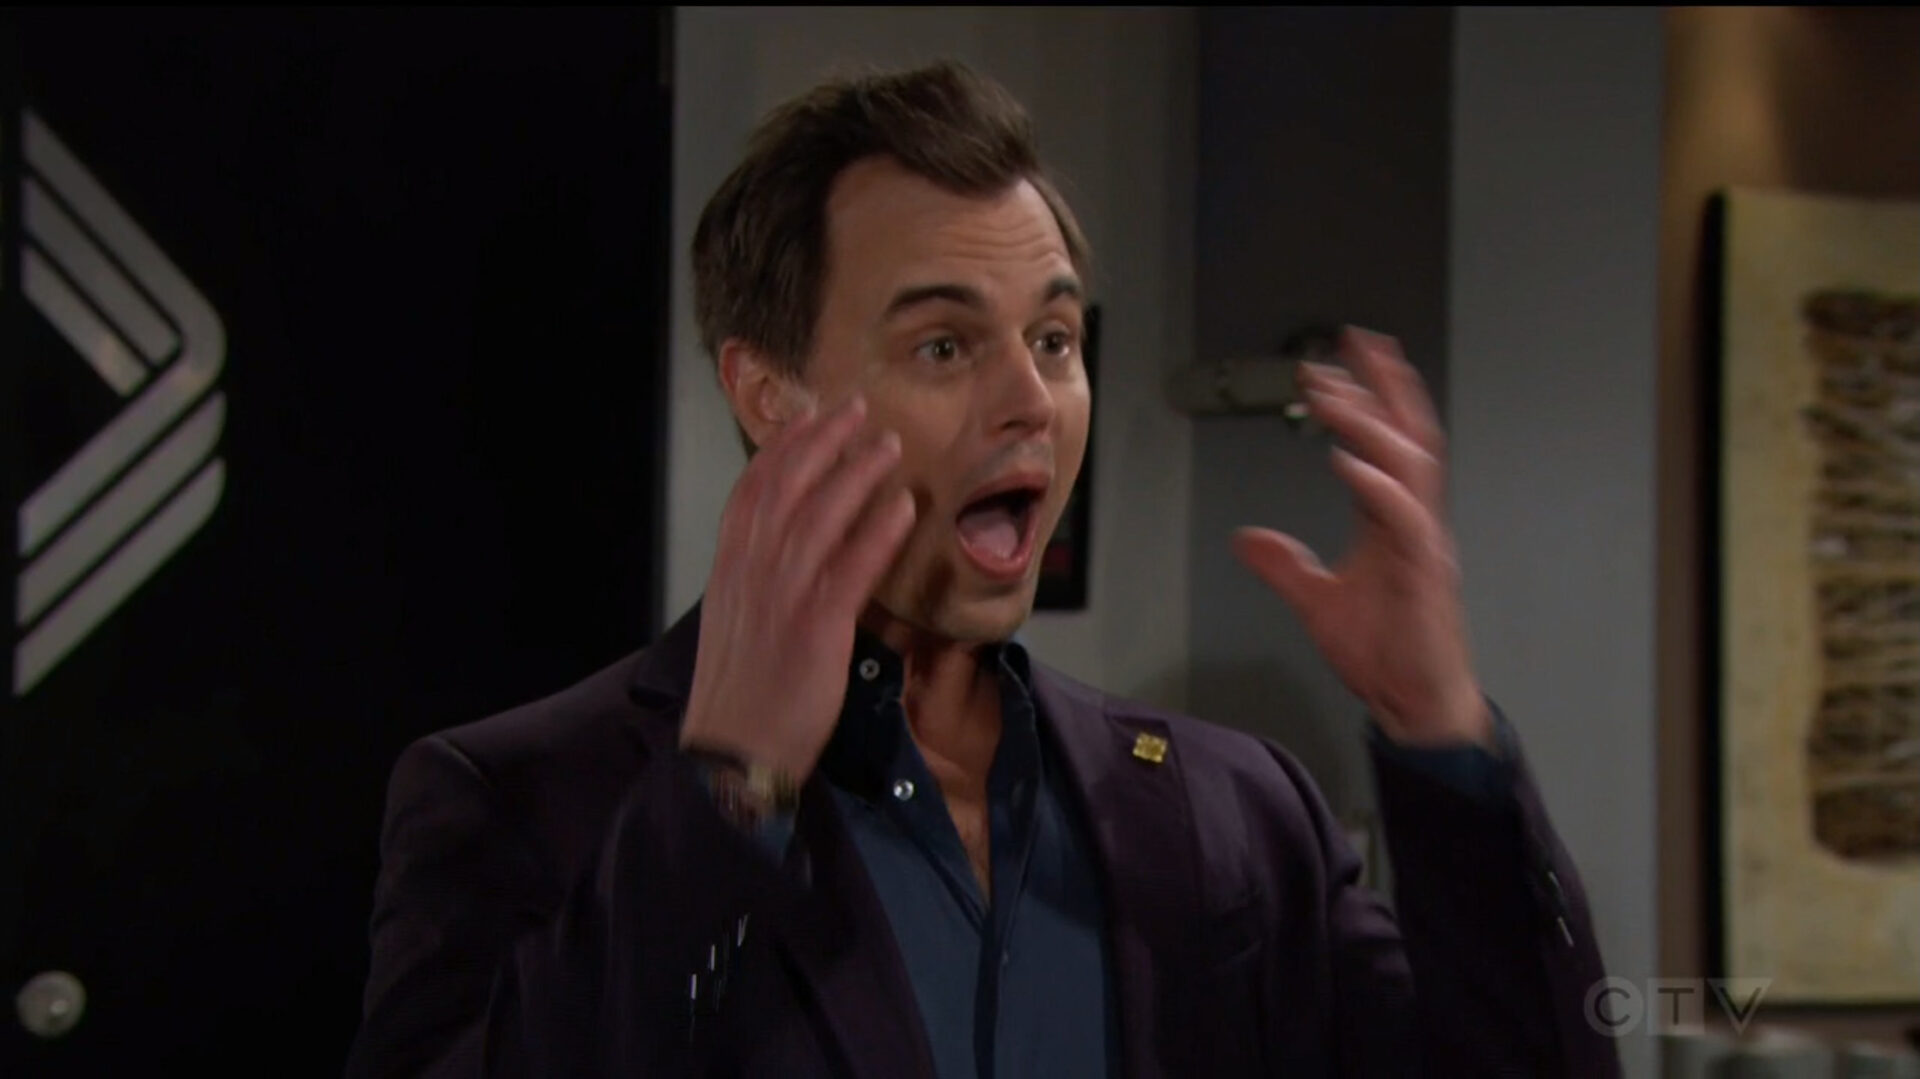 wyatt squeaks that he doesn't get why steffy moved in with finn